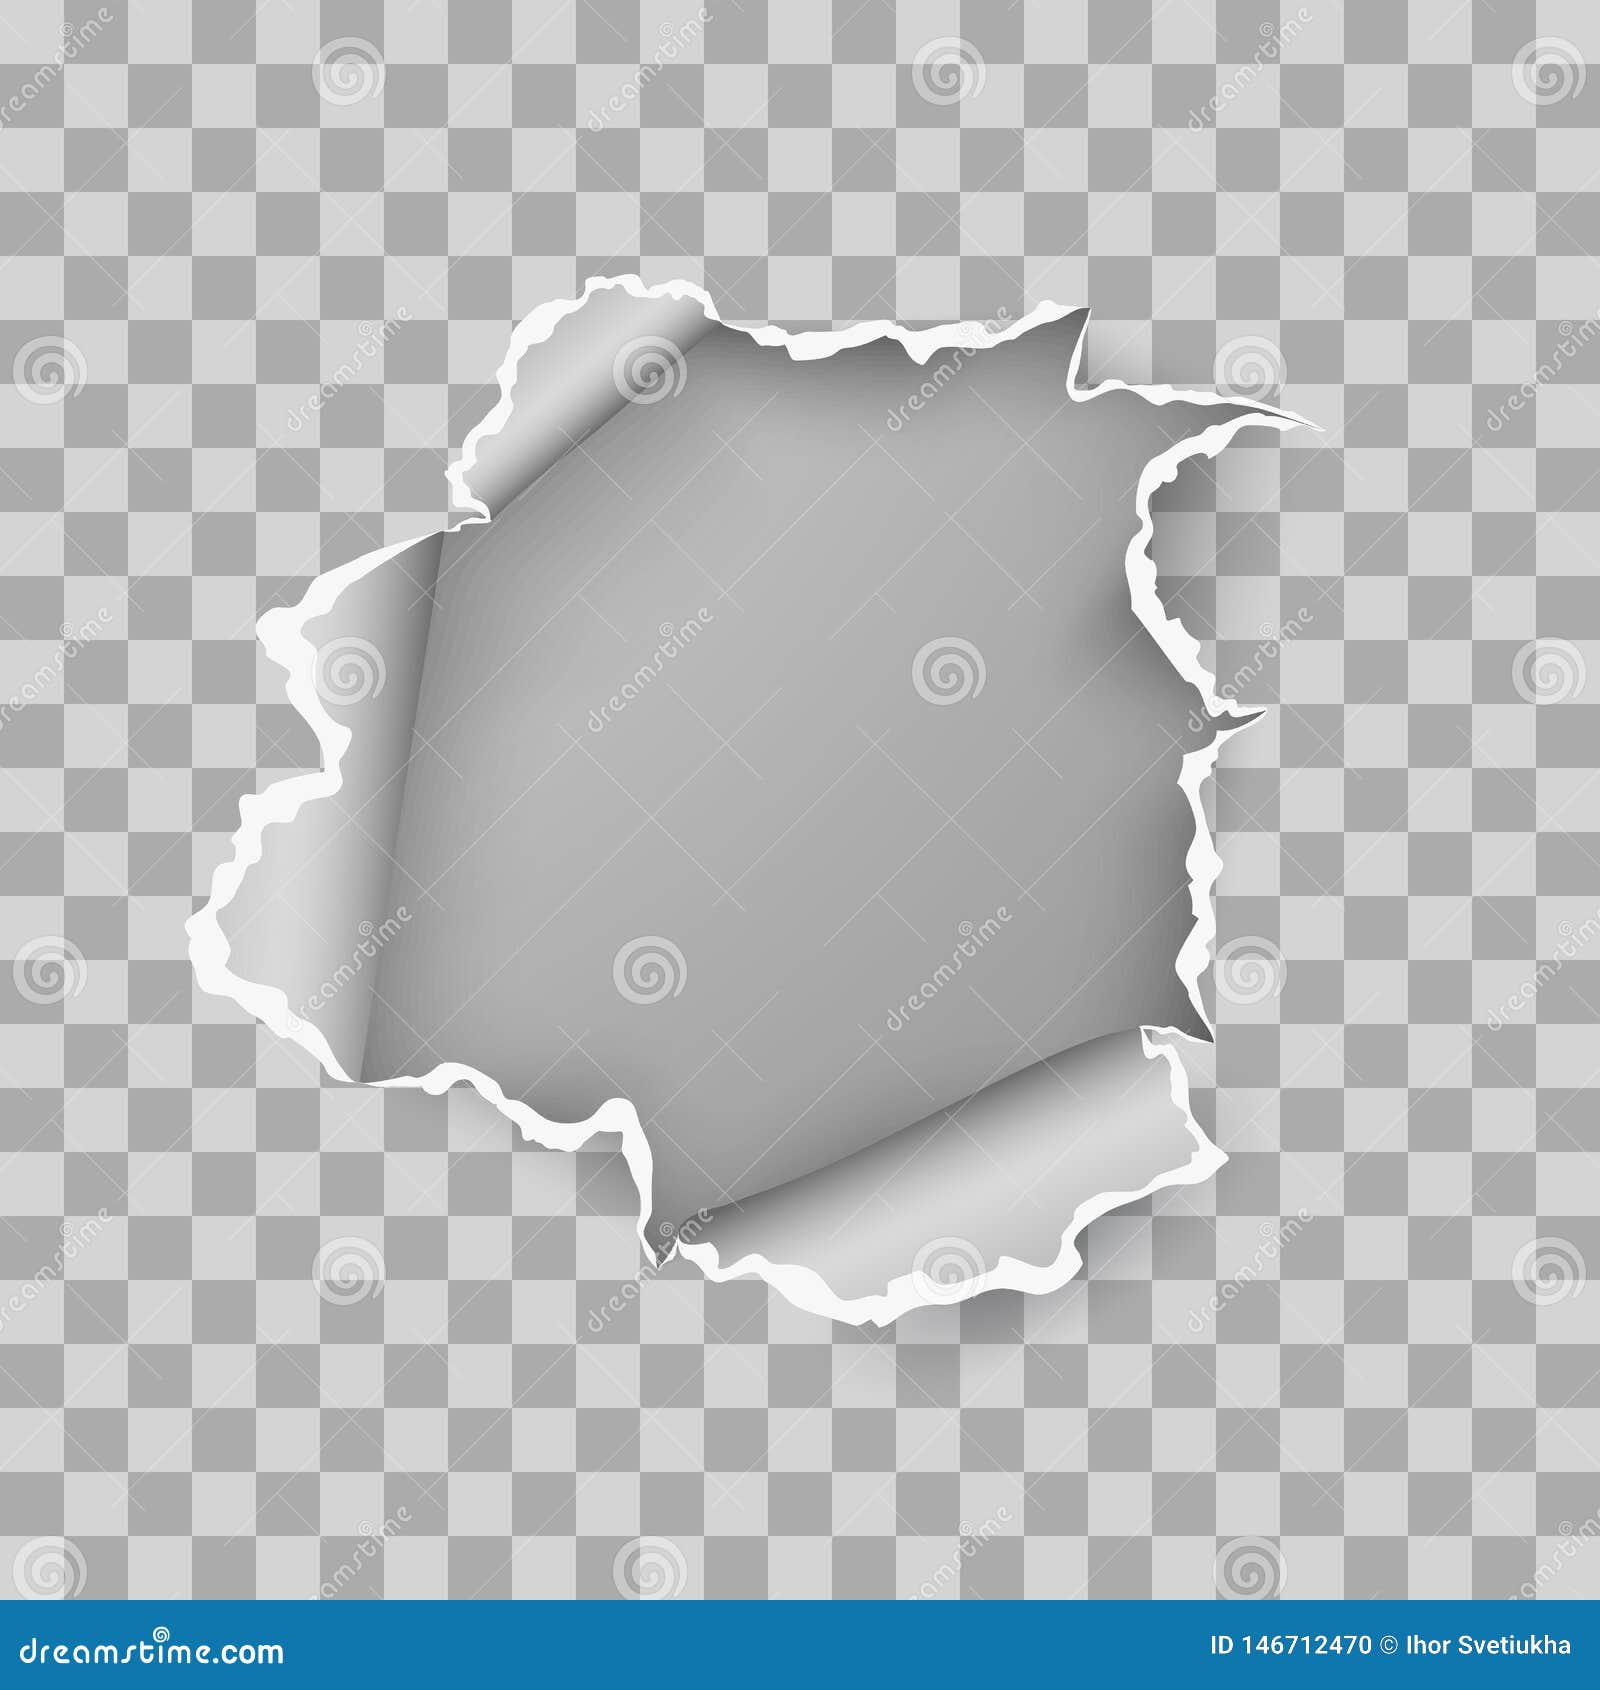 Paper realistic hole. Ripped torn hole on transparent background, cardboard  rip burst, damaged sheet with curled pieces, open paper gap, bullets ripping  page texture vector illustration Stock Vector